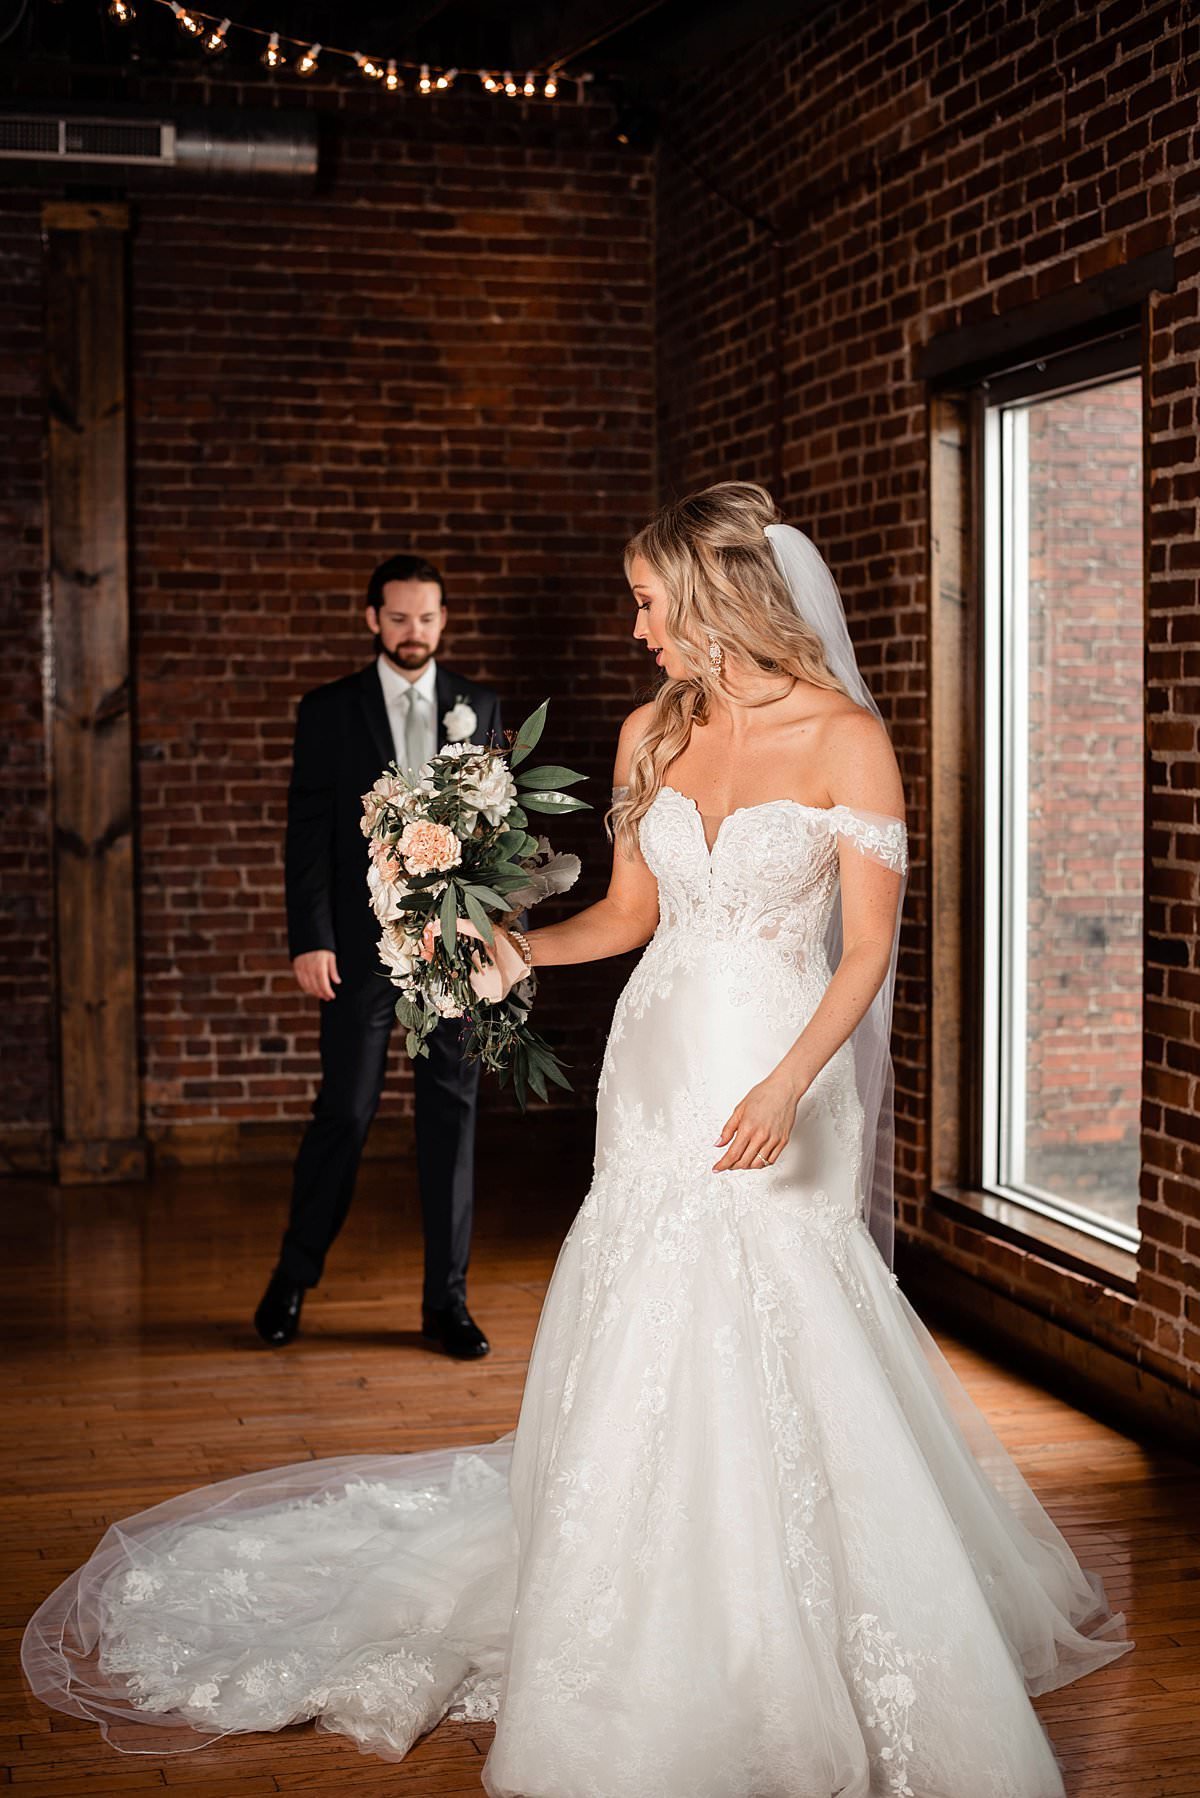 Bride showing off her gorgeous lace wedding dress to her husband during their first look